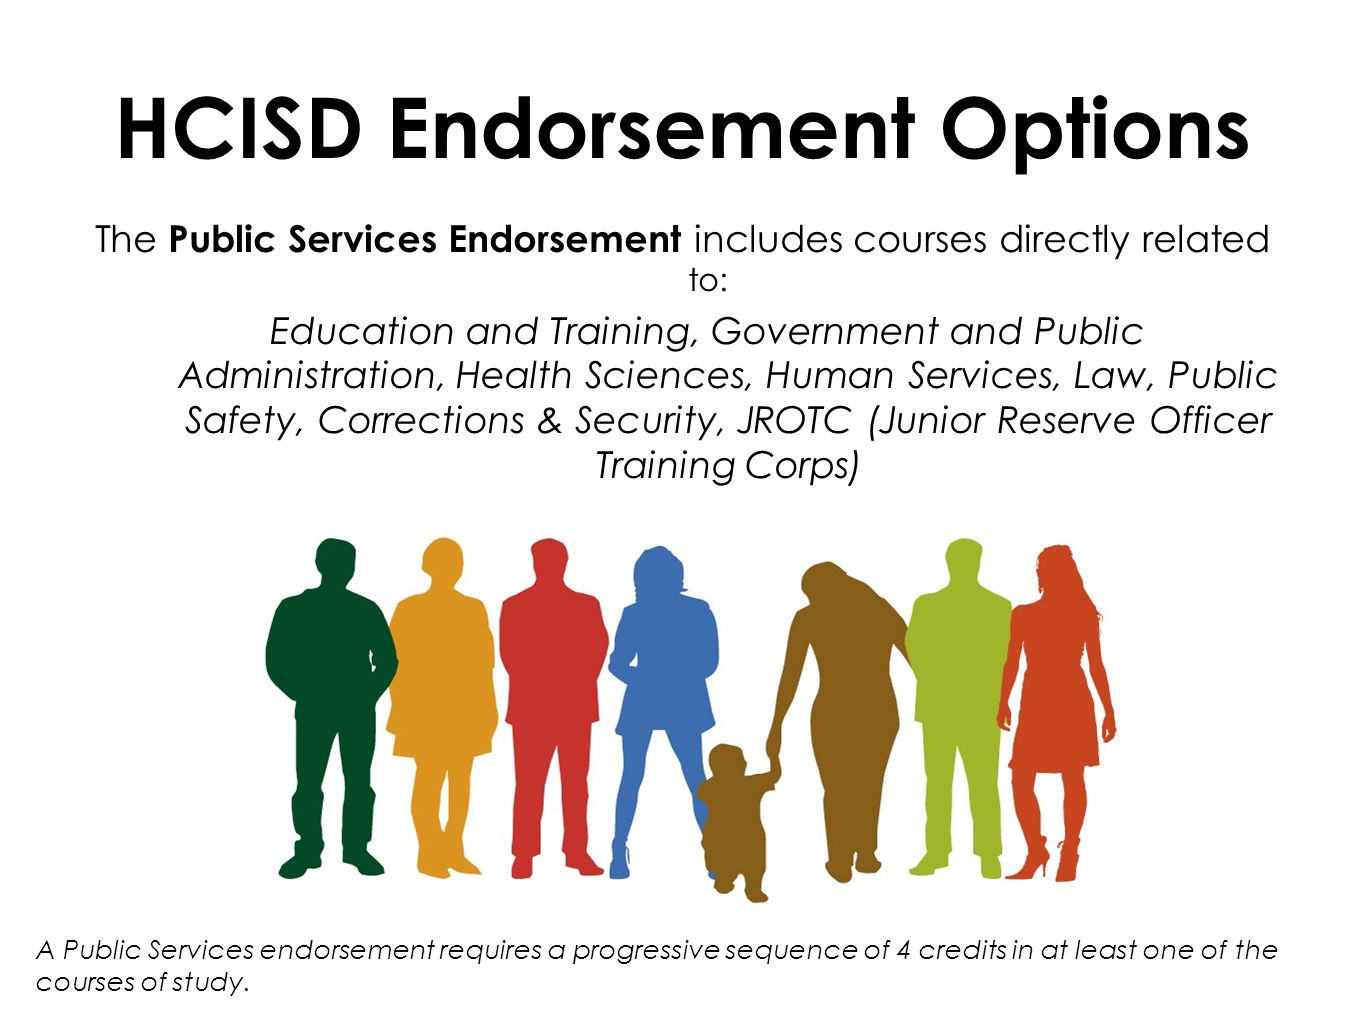 HCISD Endorsement Options The Public Services Endorsement includes courses directly related to: Education and Training, Government and Public Administration, Health Sciences, Human Services, Law, Public Safety, Corrections & Security, JROTC (Junior Reserve Officer Training Corps) A Public Services endorsement requires a progressive sequence of 4 credits in at least one of the courses of study.